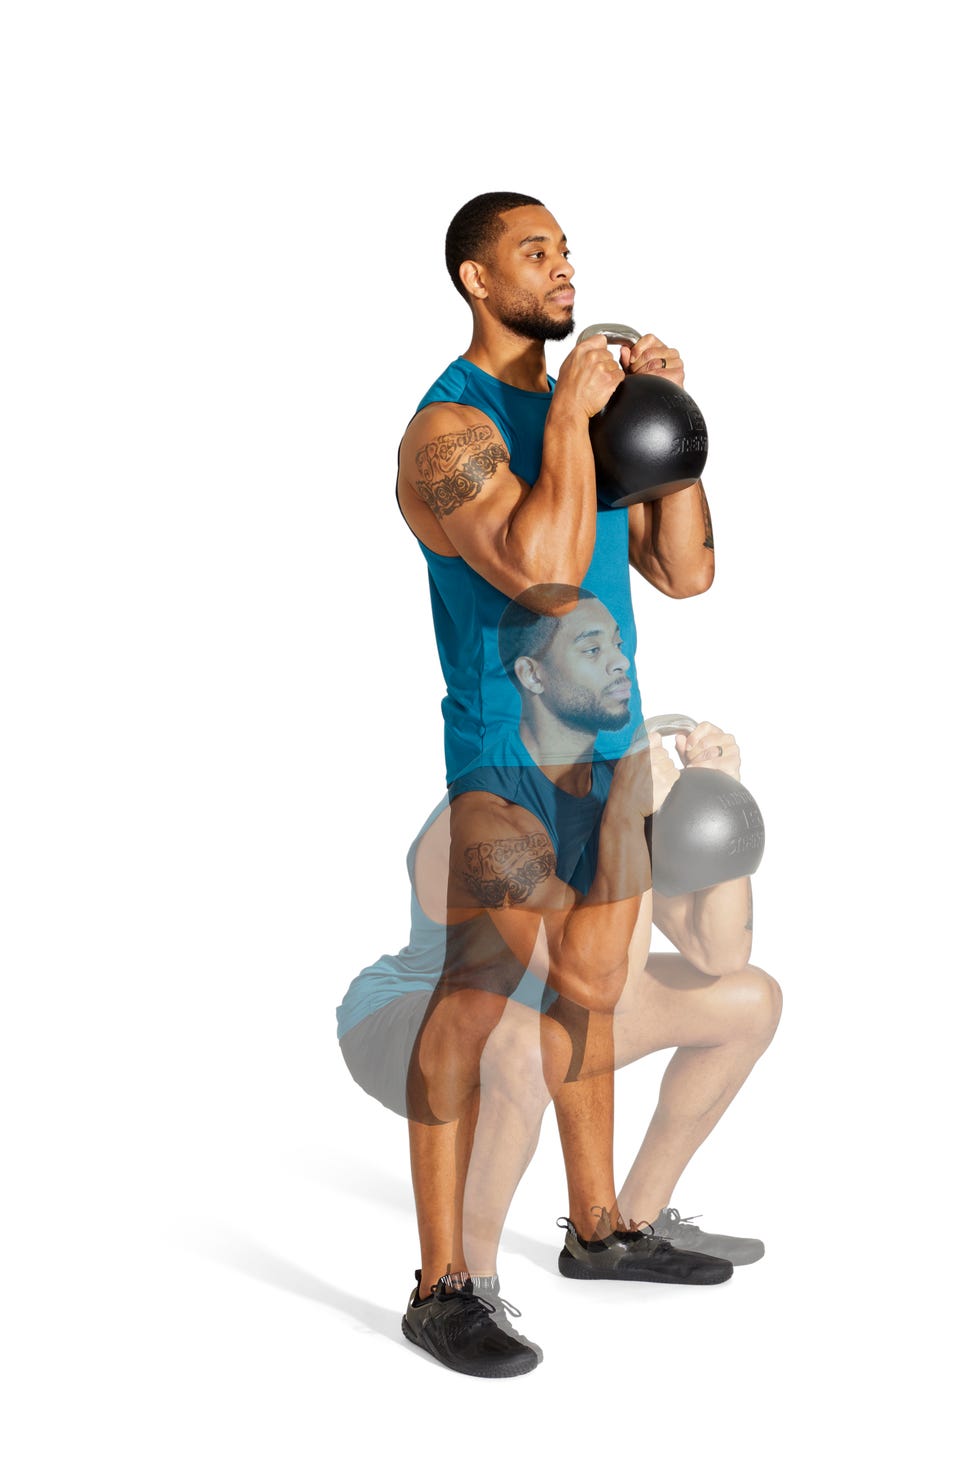 DUMBBELL COMPLEX WORKOUT BY @humandesignpt. Music: Faded Musician